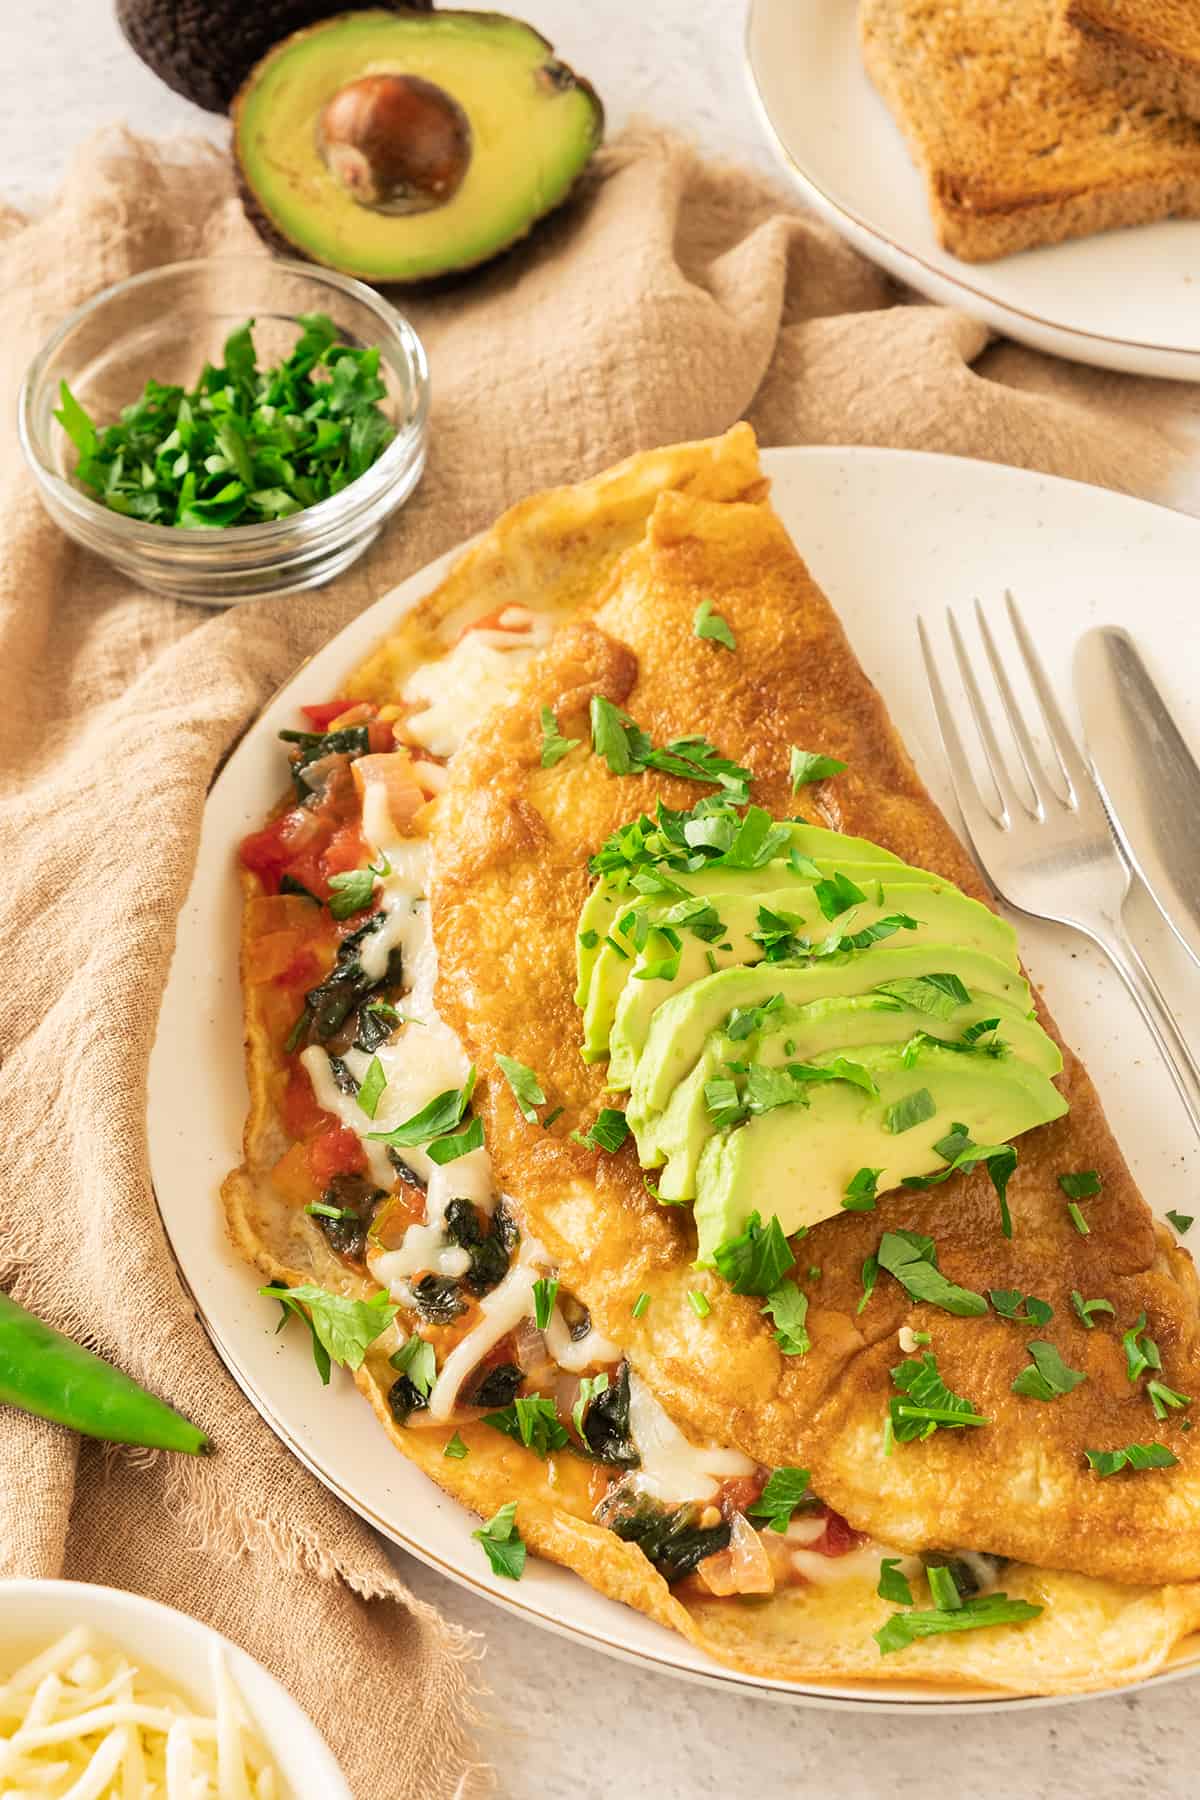 A California Omelette served on a white plate and topped with avocado slices and chopped cilantro.